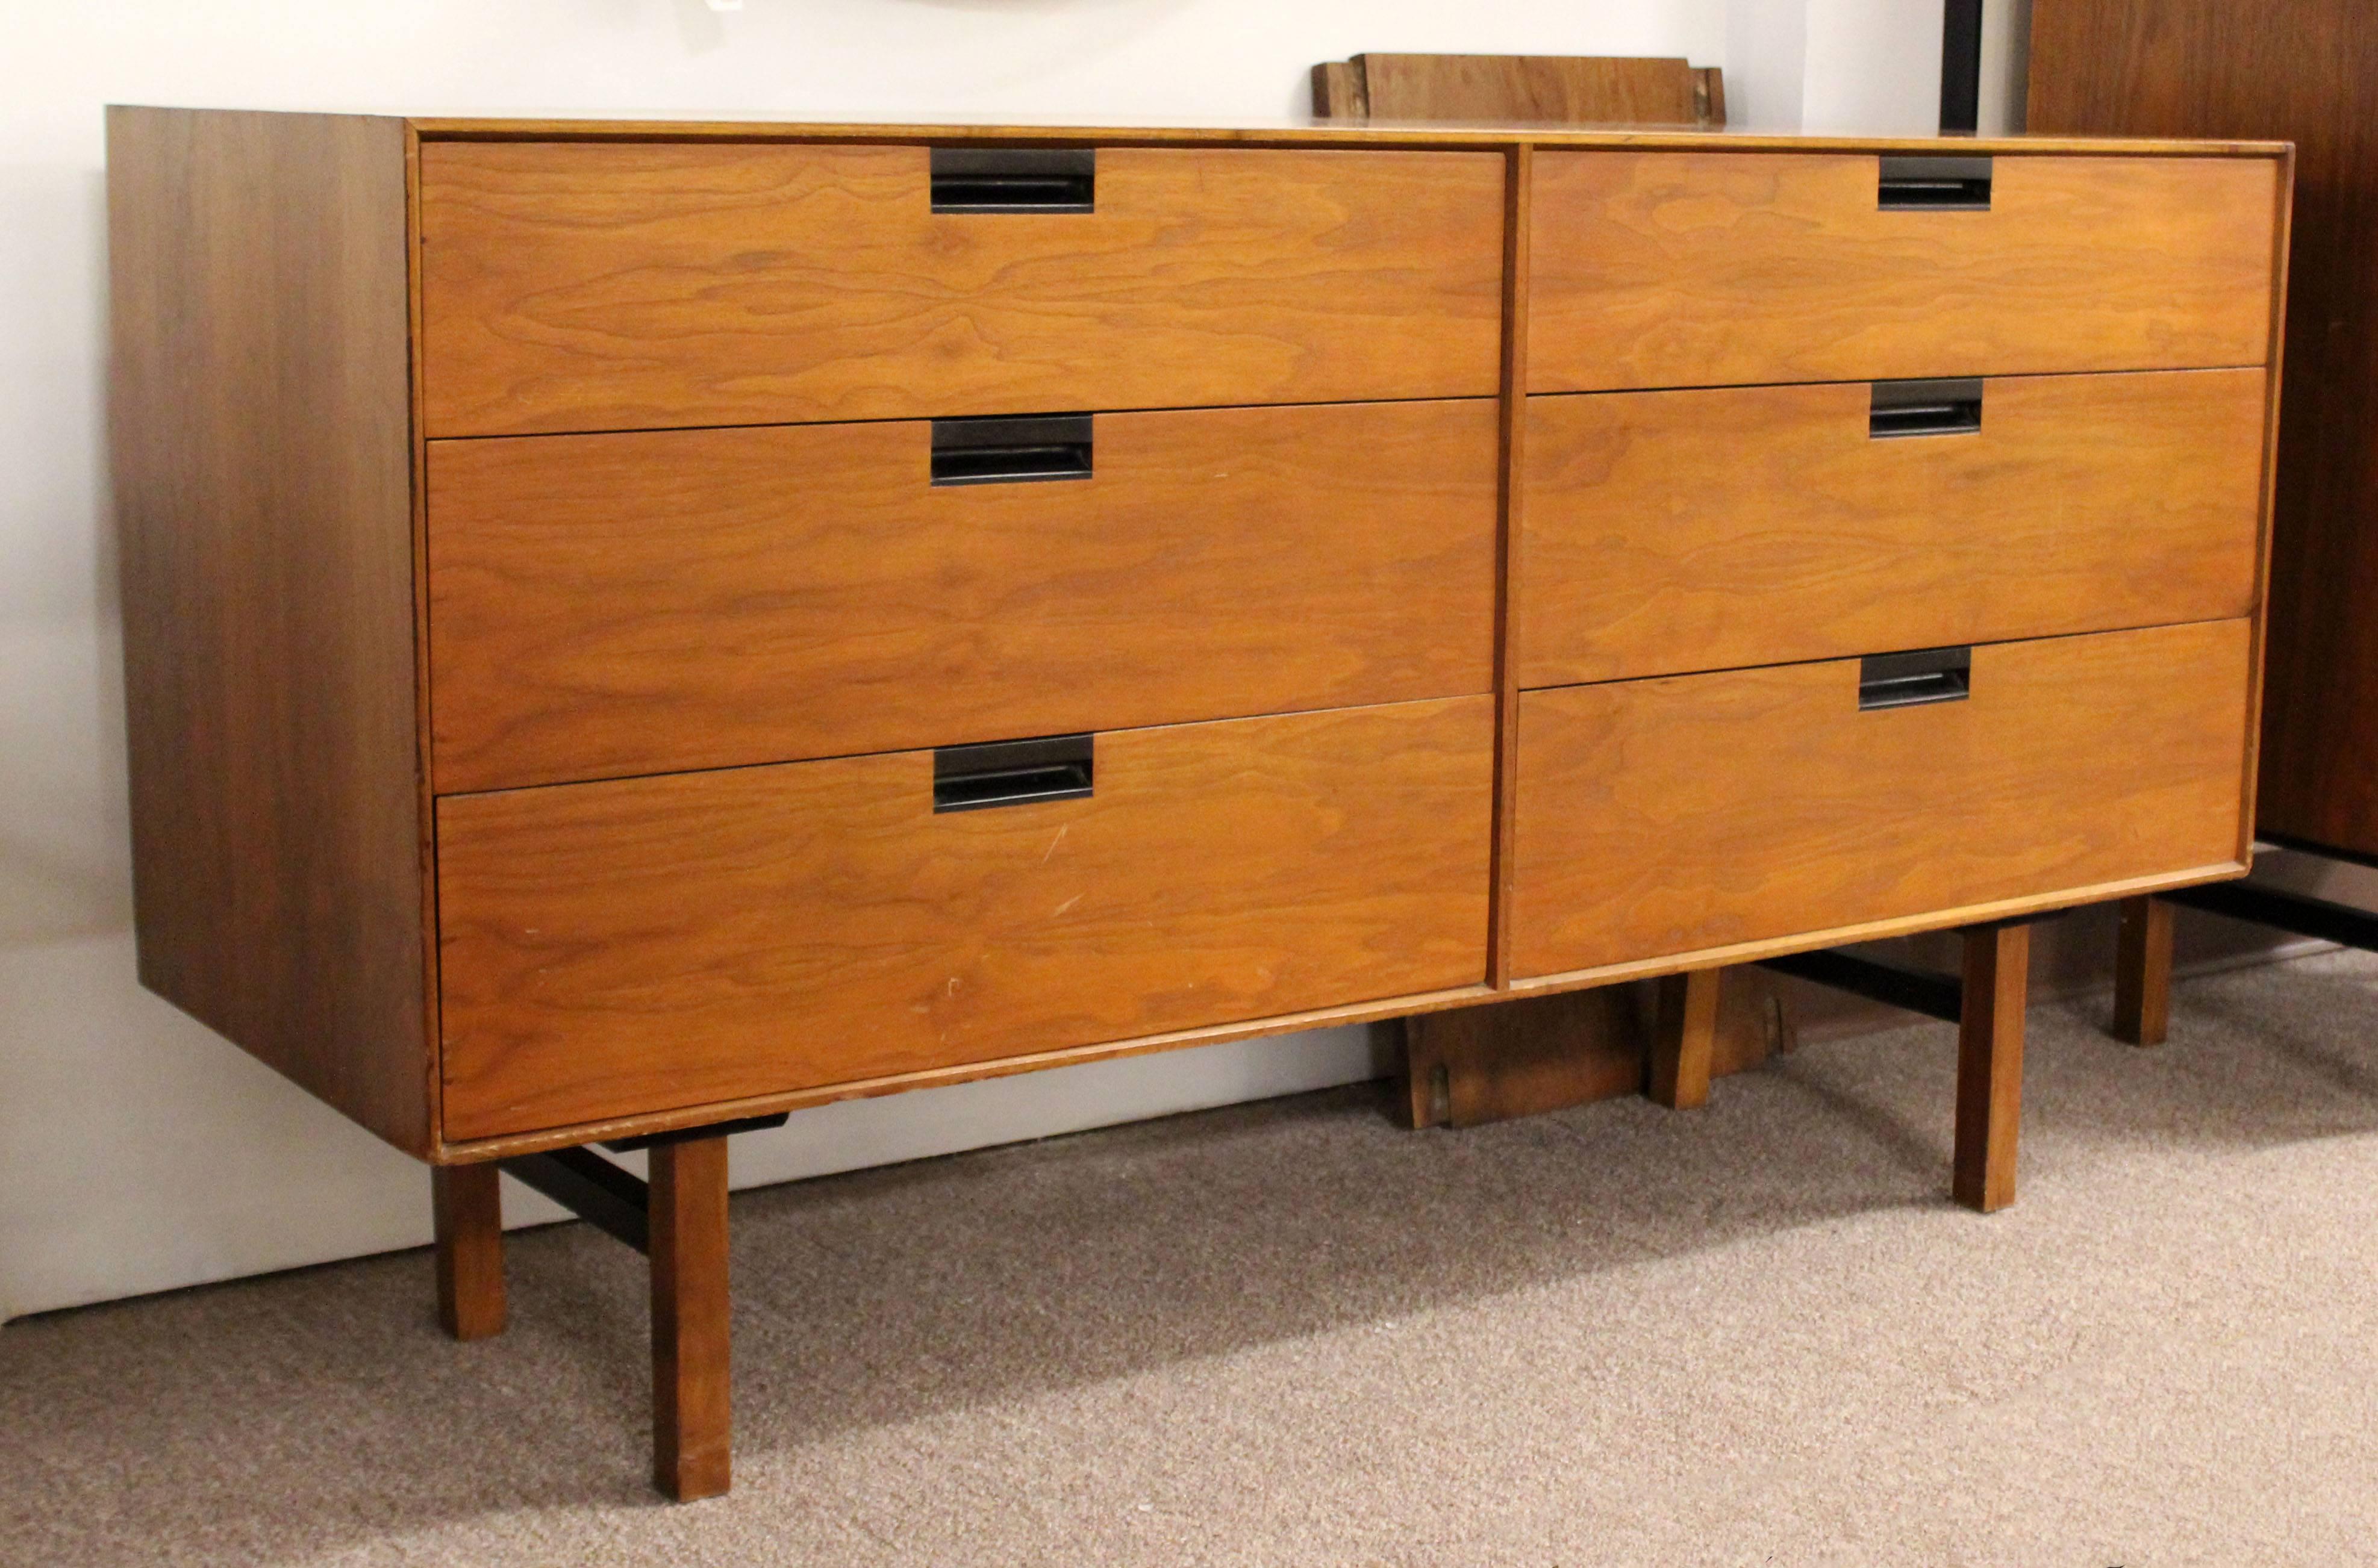 For your consideration is a gorgeous, six-drawer, lowboy dresser, or credenza by Milo Baughman for Arch Gordon, circa the 1950s. In excellent condition. The dimensions are 54 W x 18 D x 30 H.
 